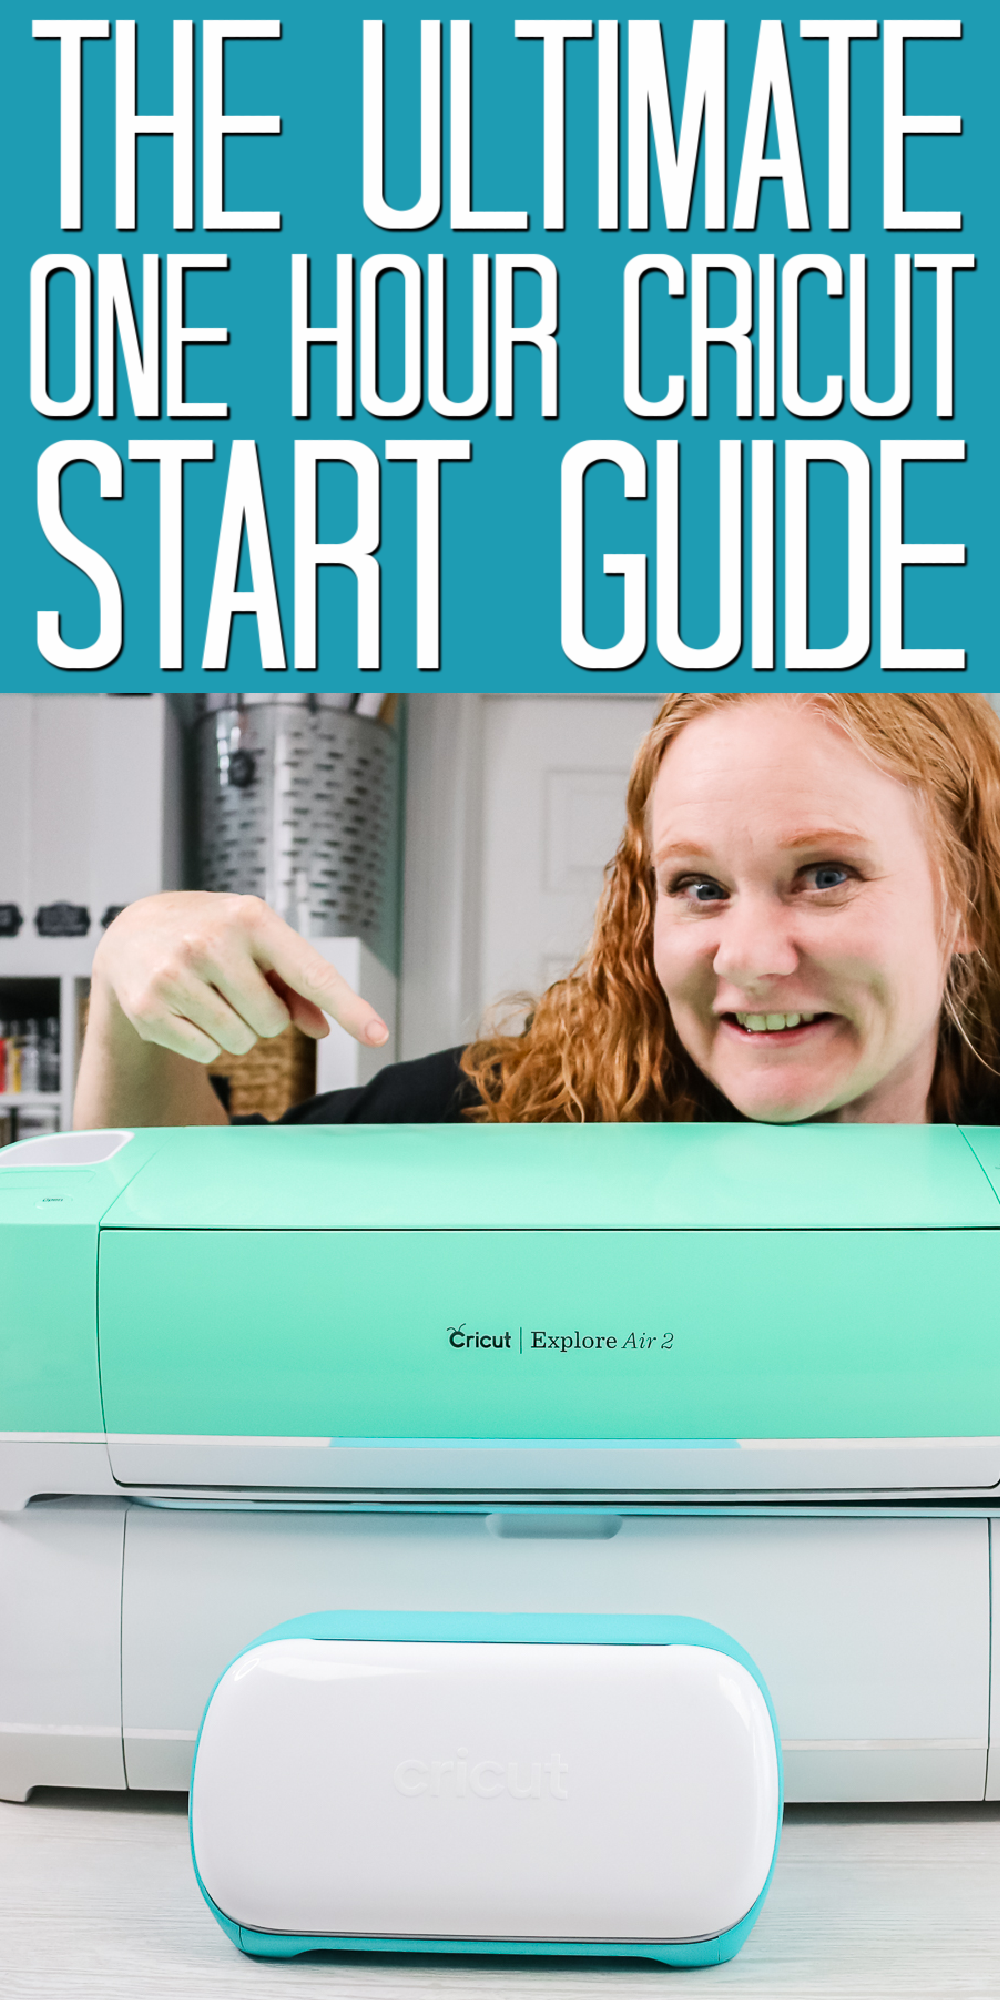 Cricut Heat App: Your Ultimate Guide - Angie Holden The Country Chic Cottage